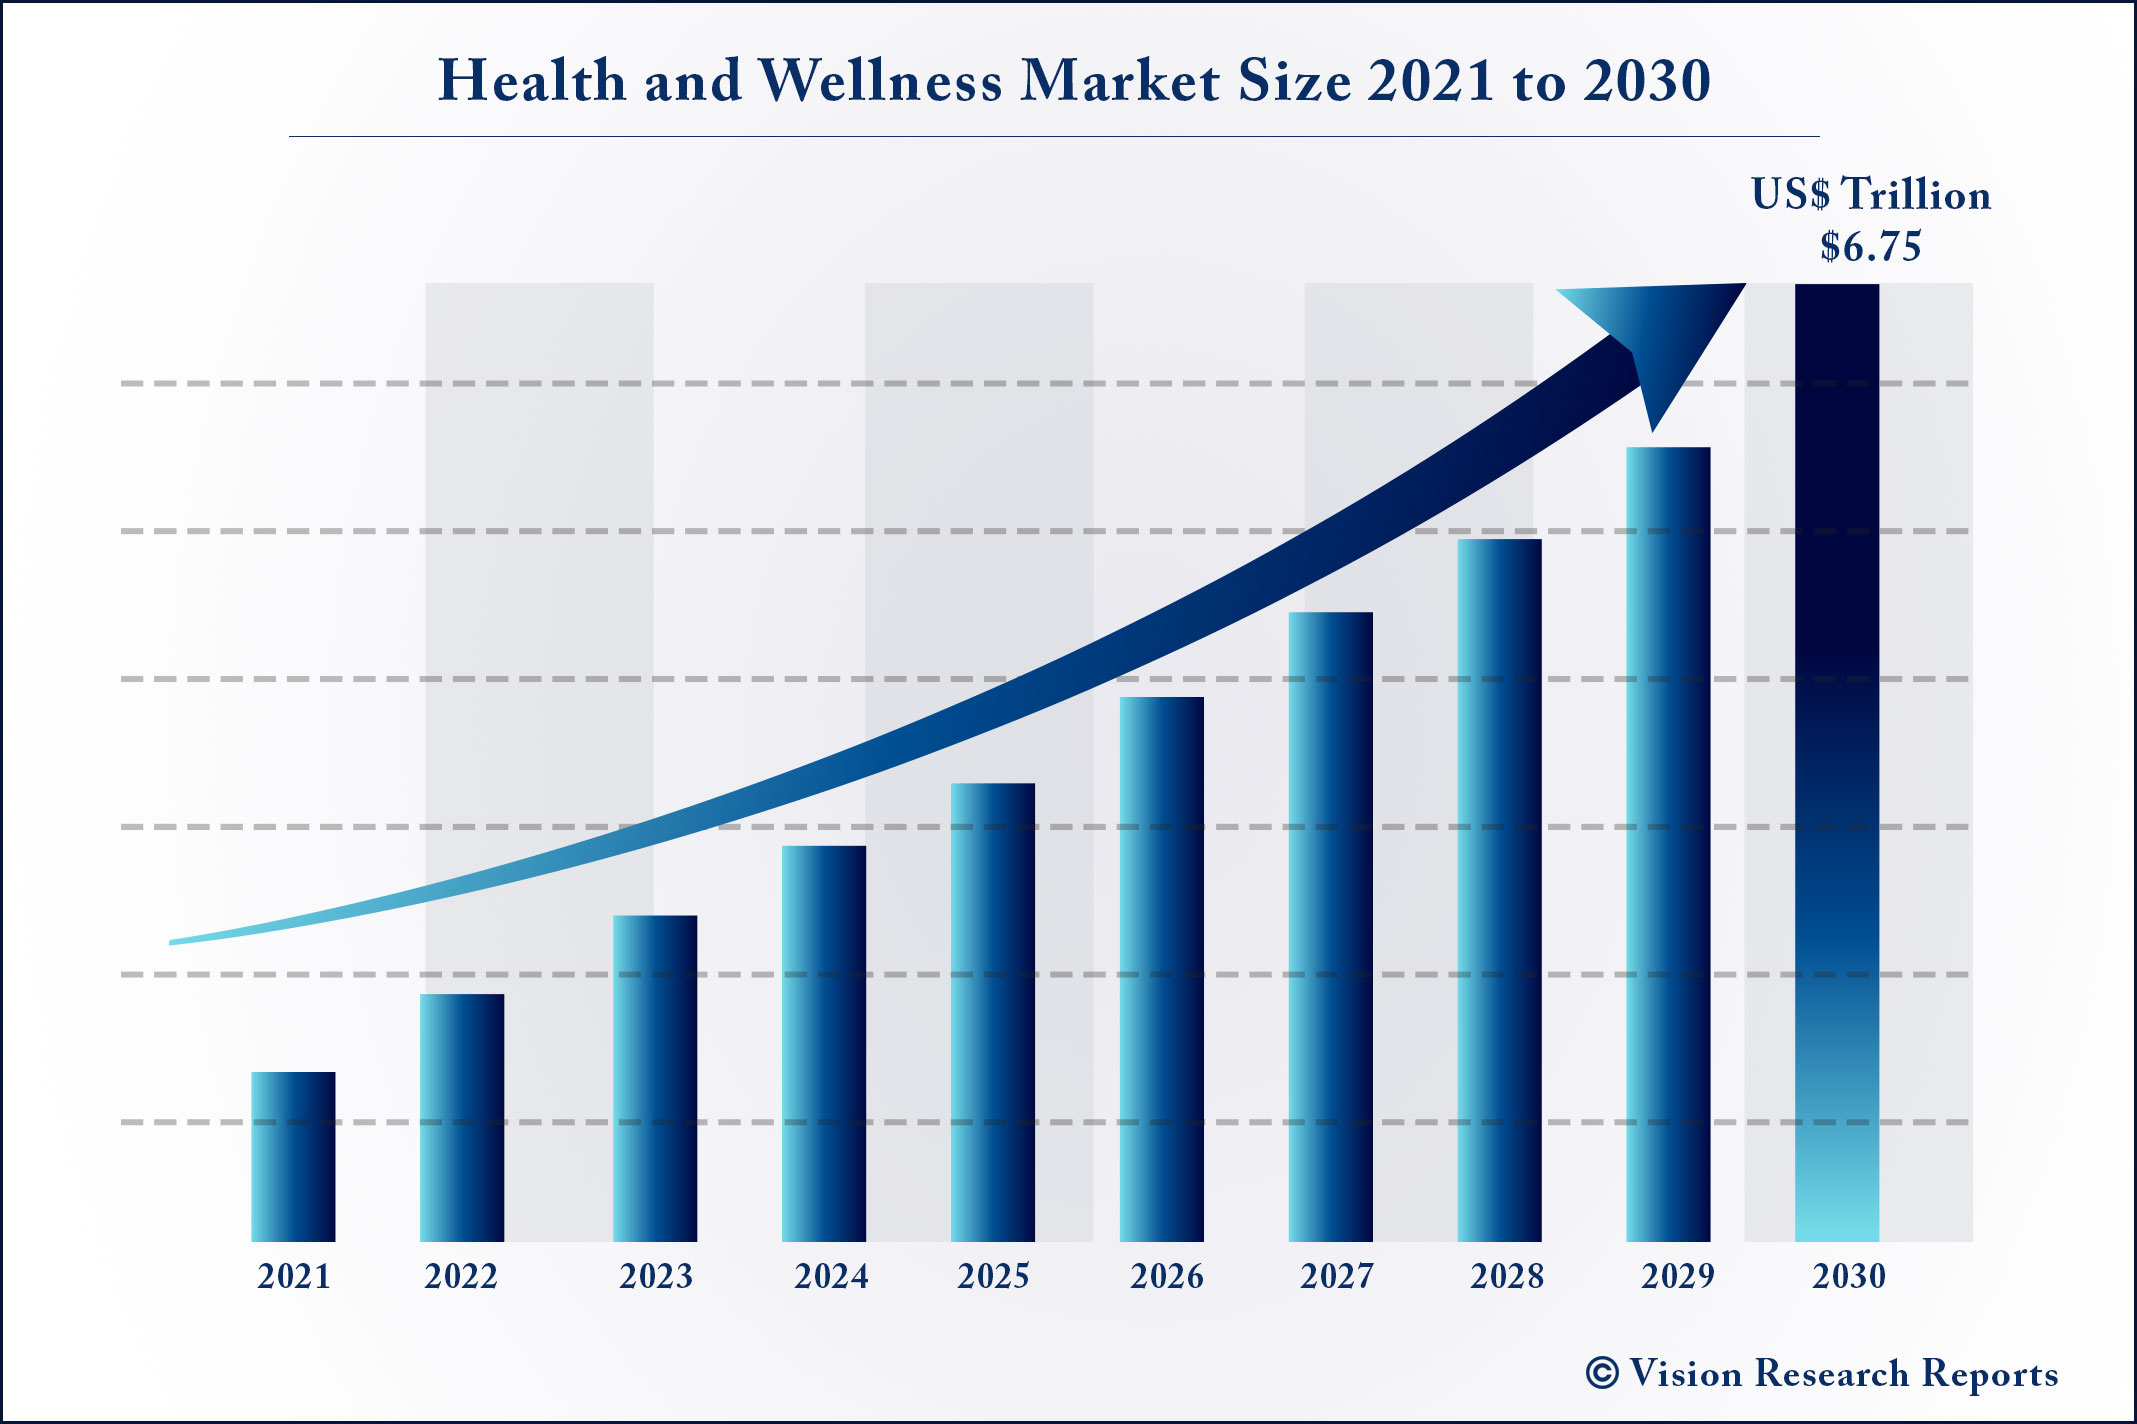 Health and Wellness Market Size 2021 to 2030